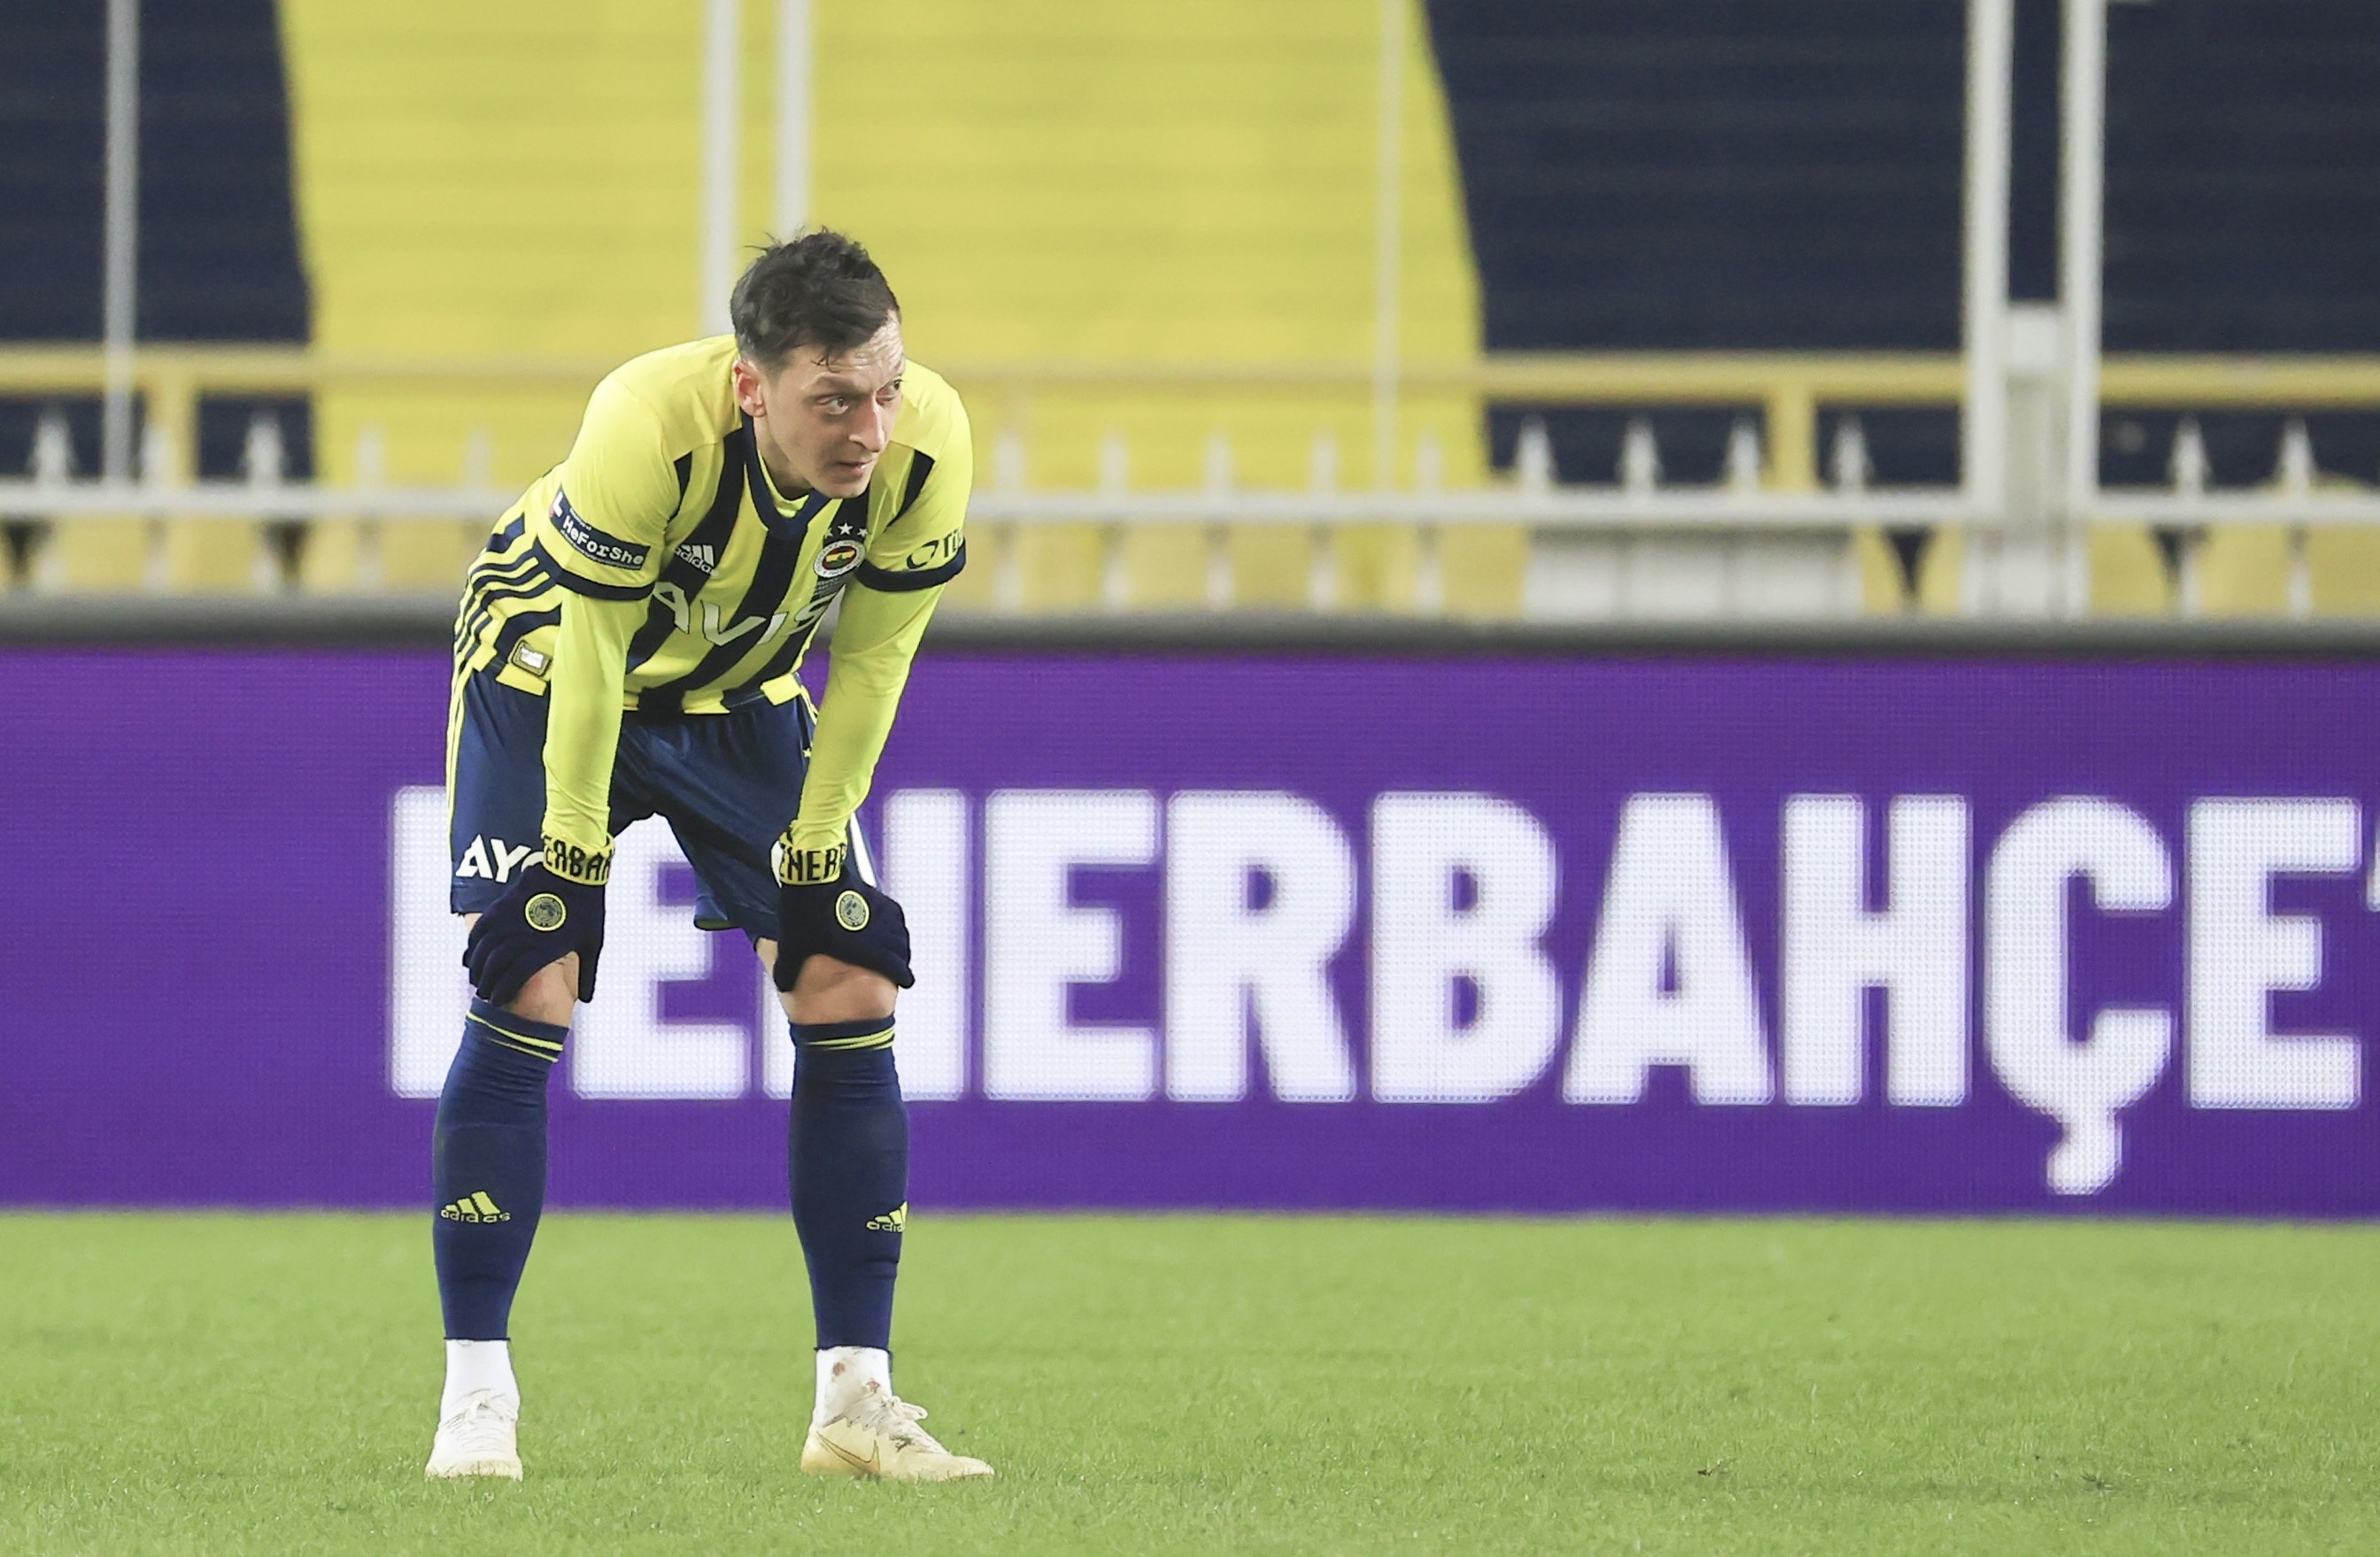 Ex Arsenal Ace Mesut Ozil's Fenerbahce Nightmare Continues After Being Knocked Out Of Cup And Falling To Third In Table